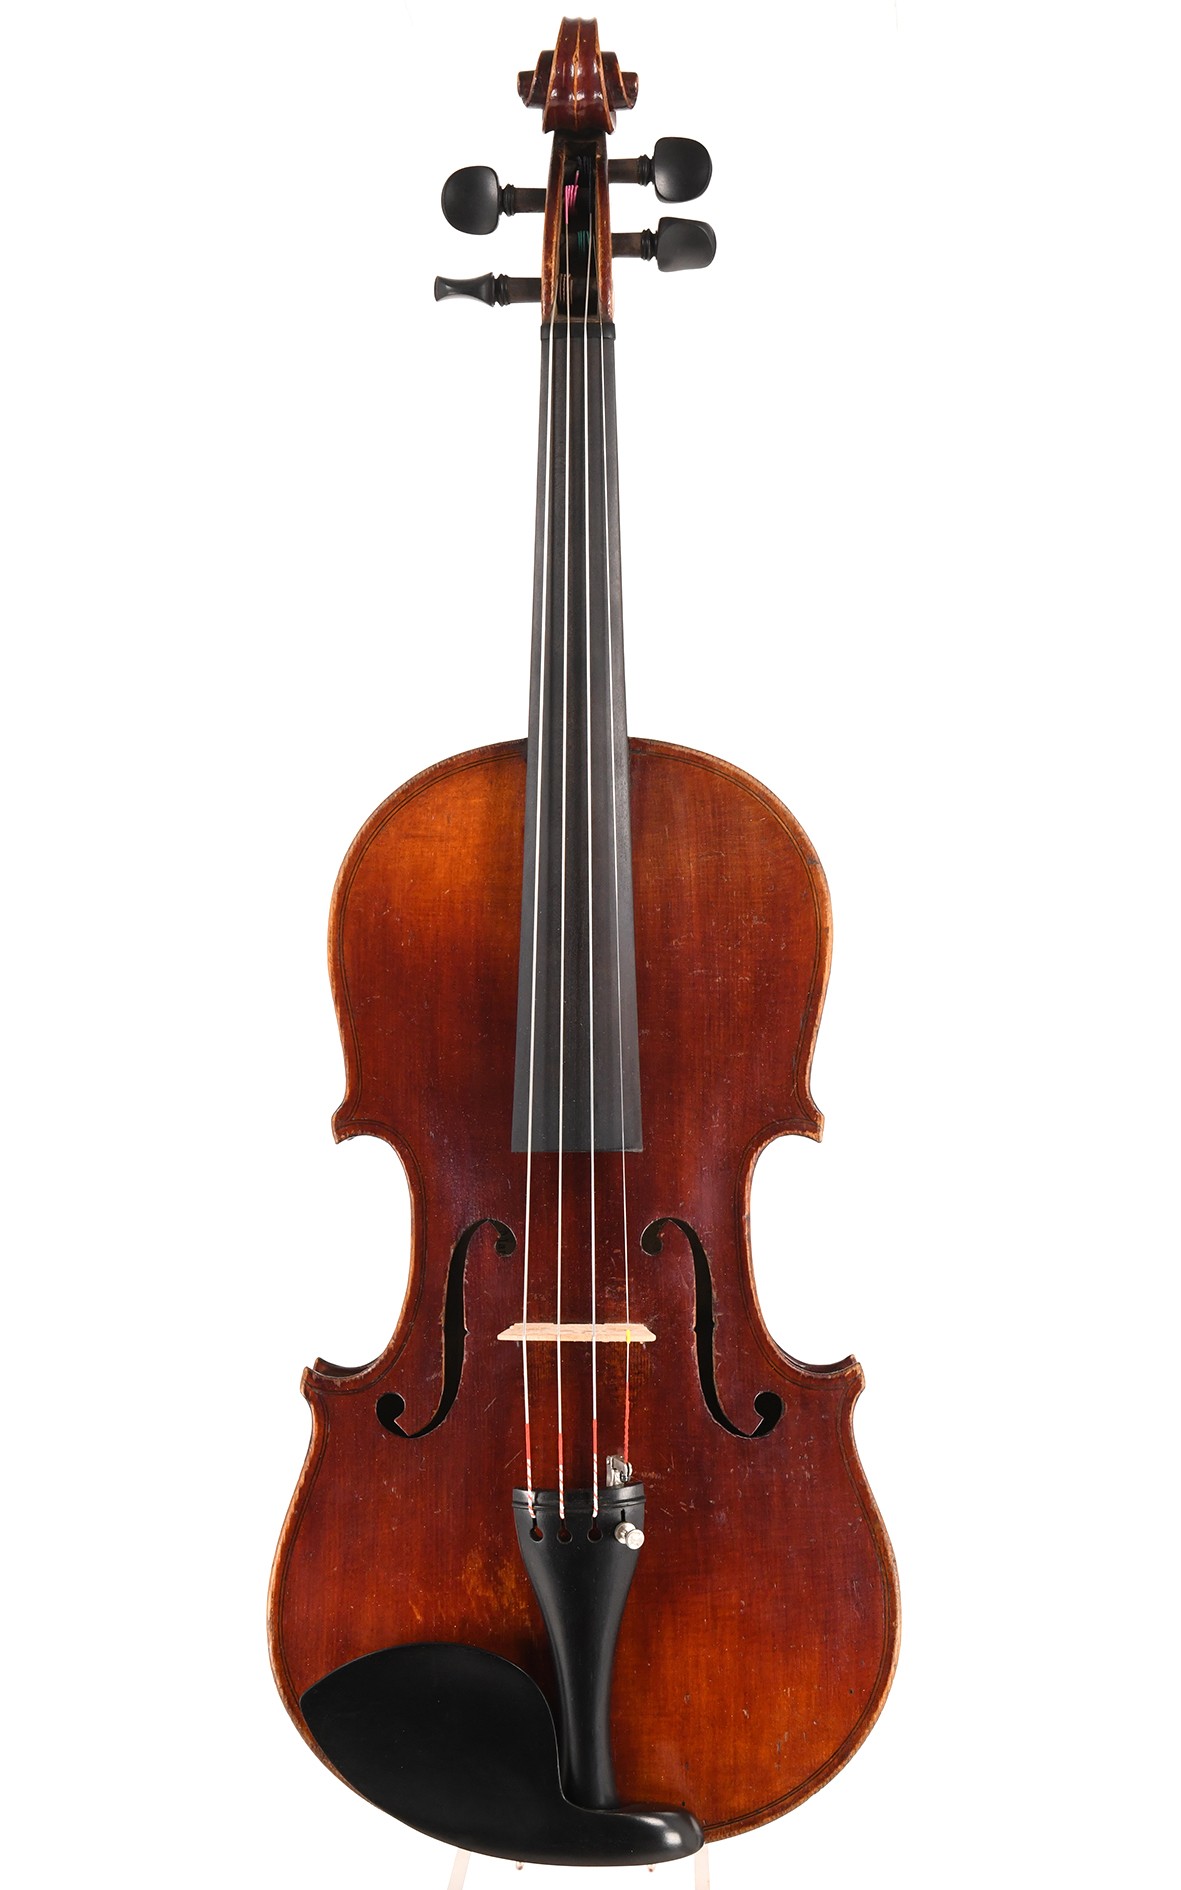 Old violin from Mittenwald, 1878 - orchestra violin - outstanding!